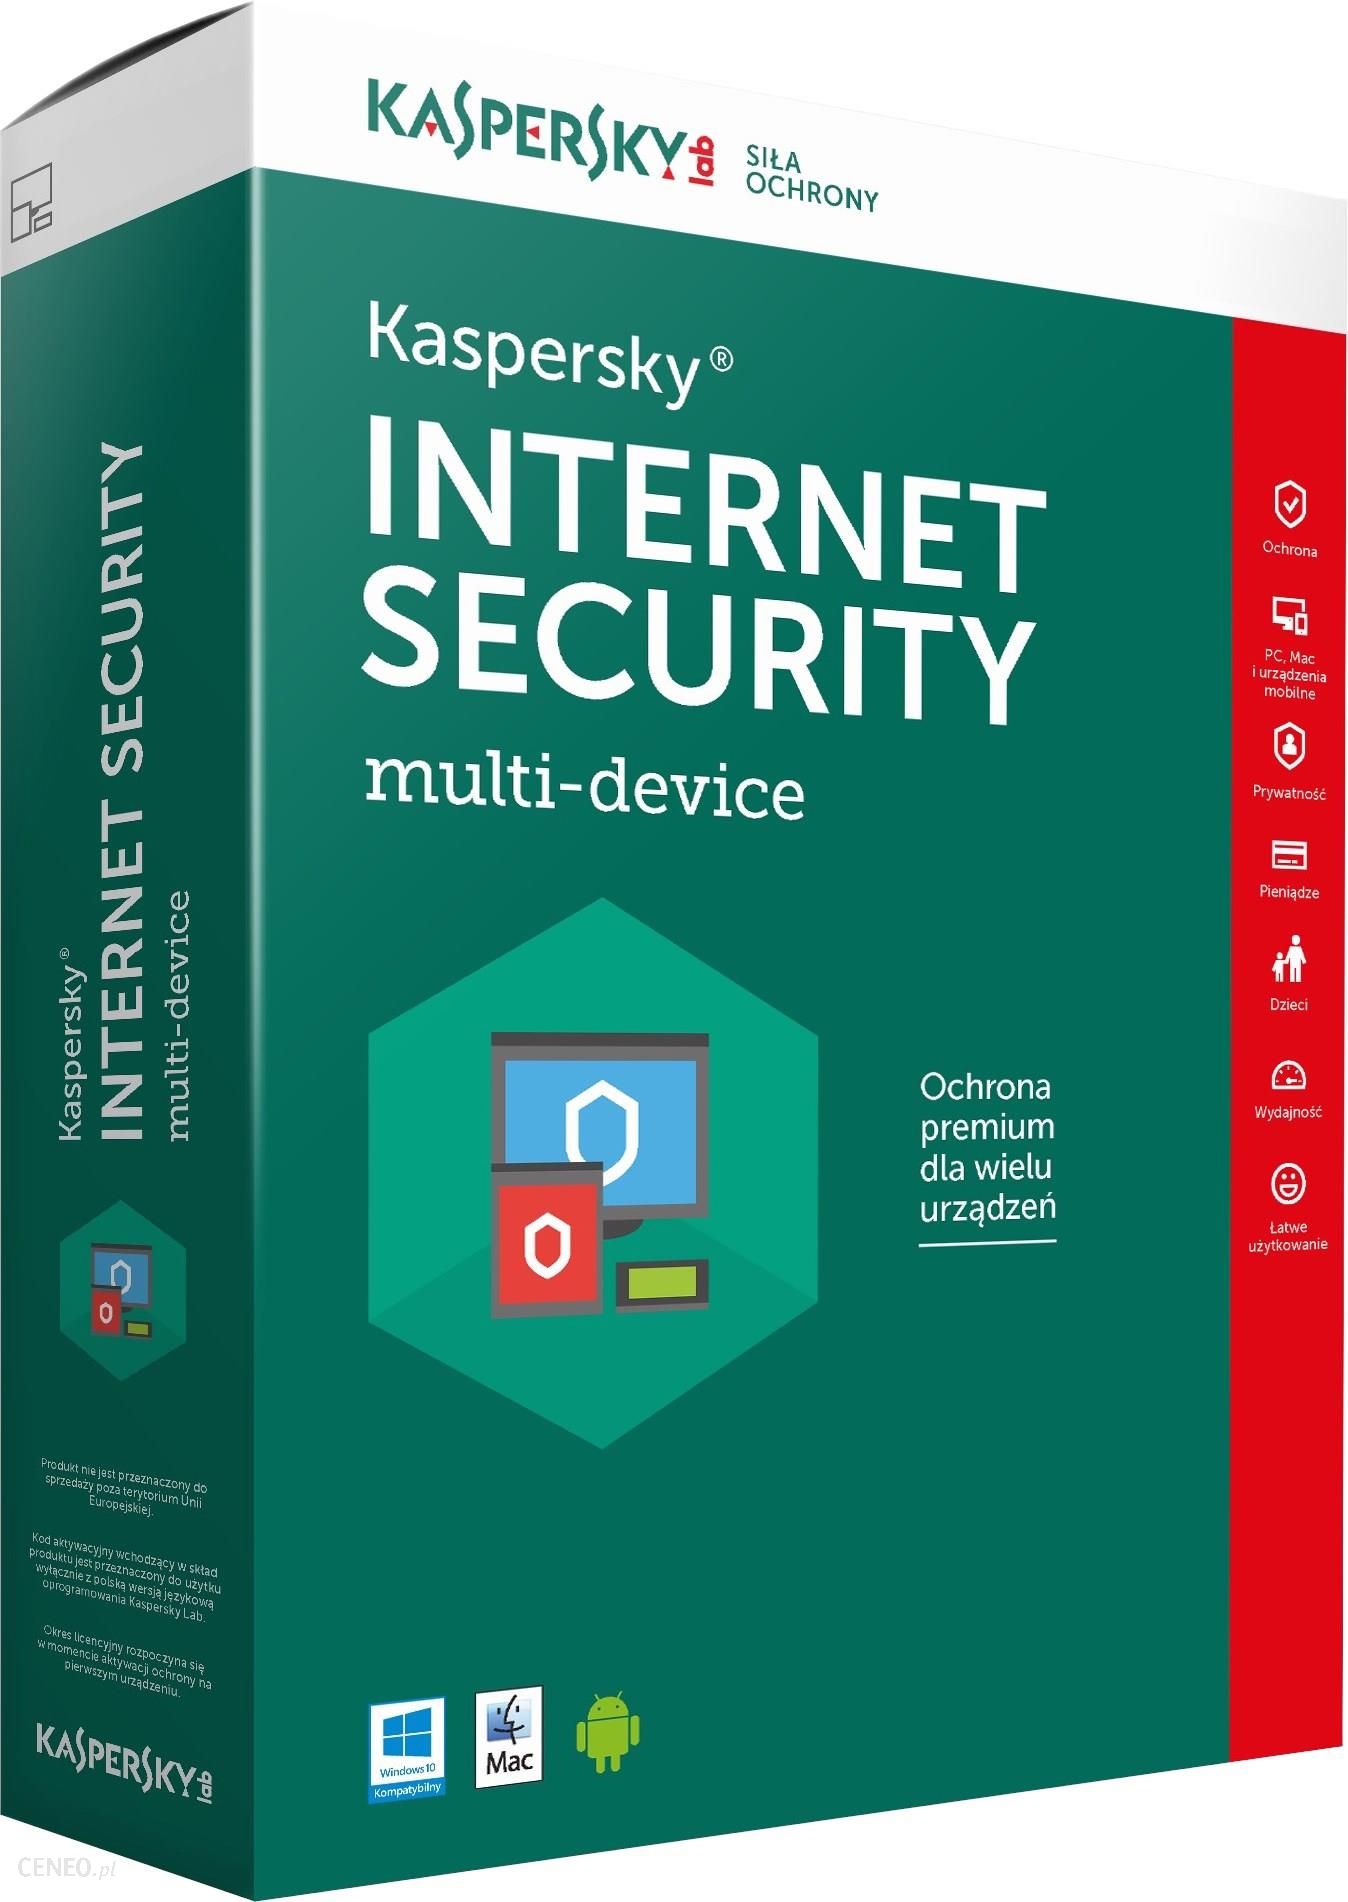 products kaspersky lab